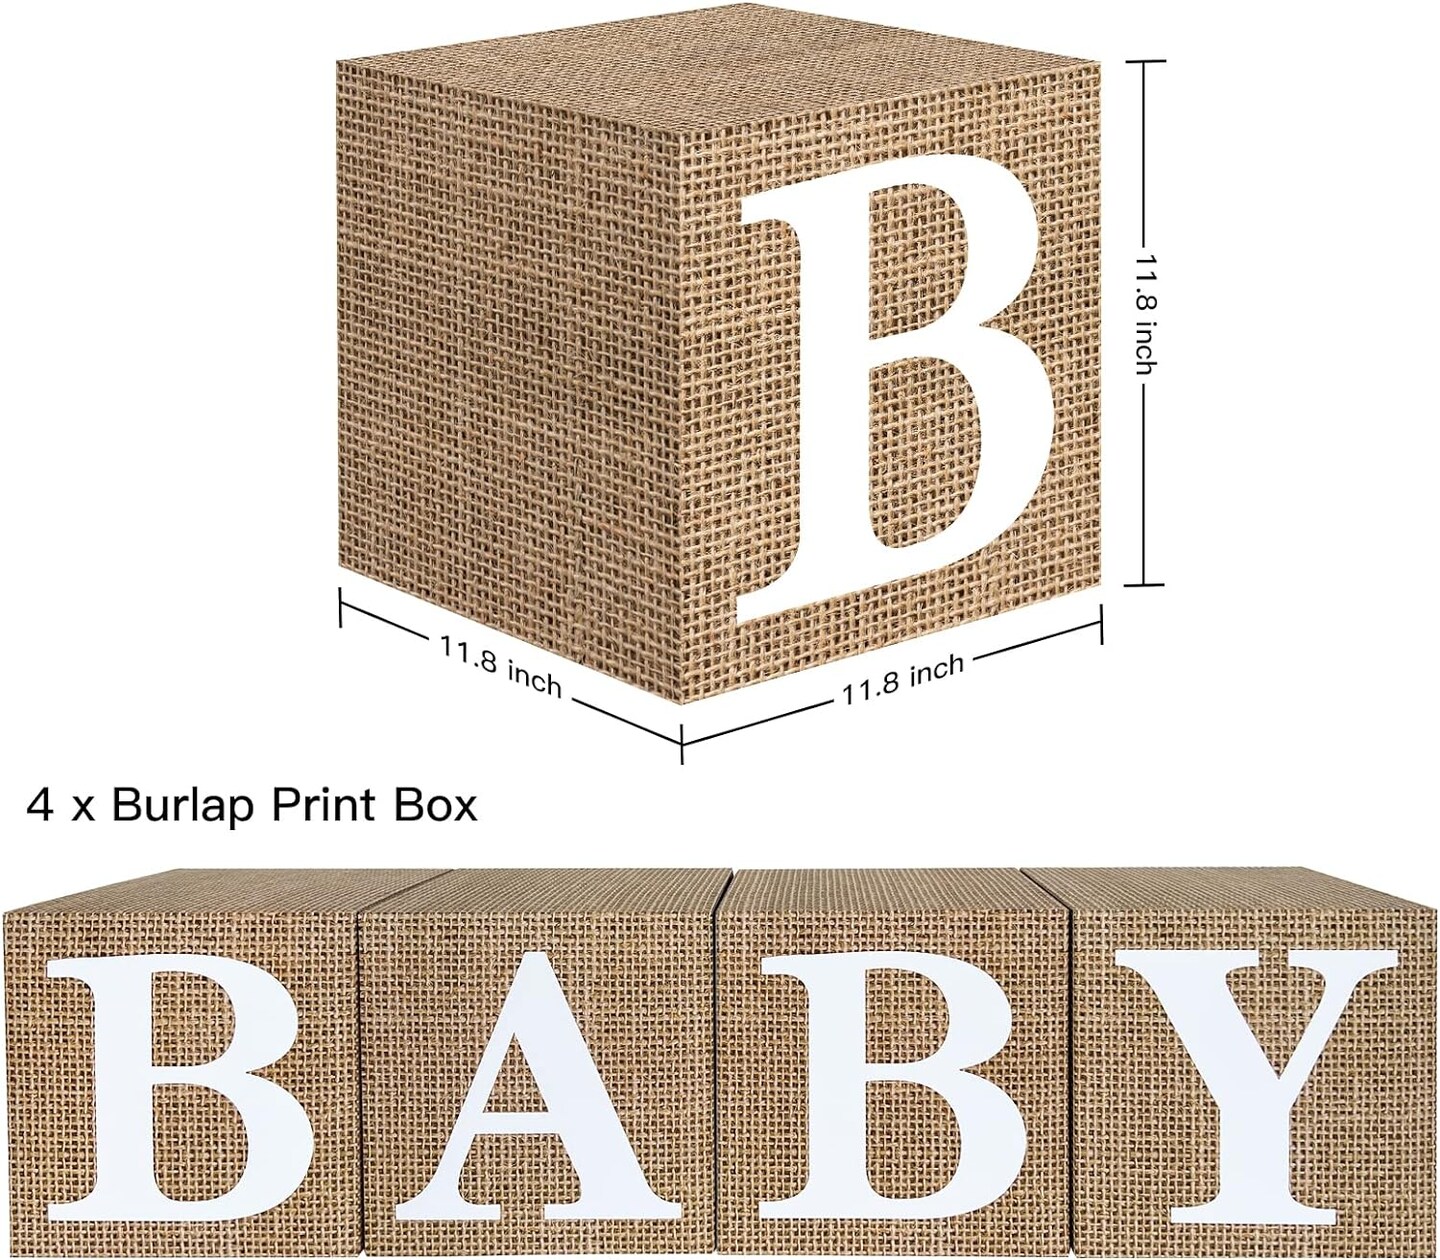 Burlap Print Baby Shower Boxes for Gender Reveal Party Gender Neutral Baby Shower Centerpiece Decor - 4 Pcs Burlap Grain Baby Cubes Baby Blocks with Letters, Rustic Baby Shower Decorations